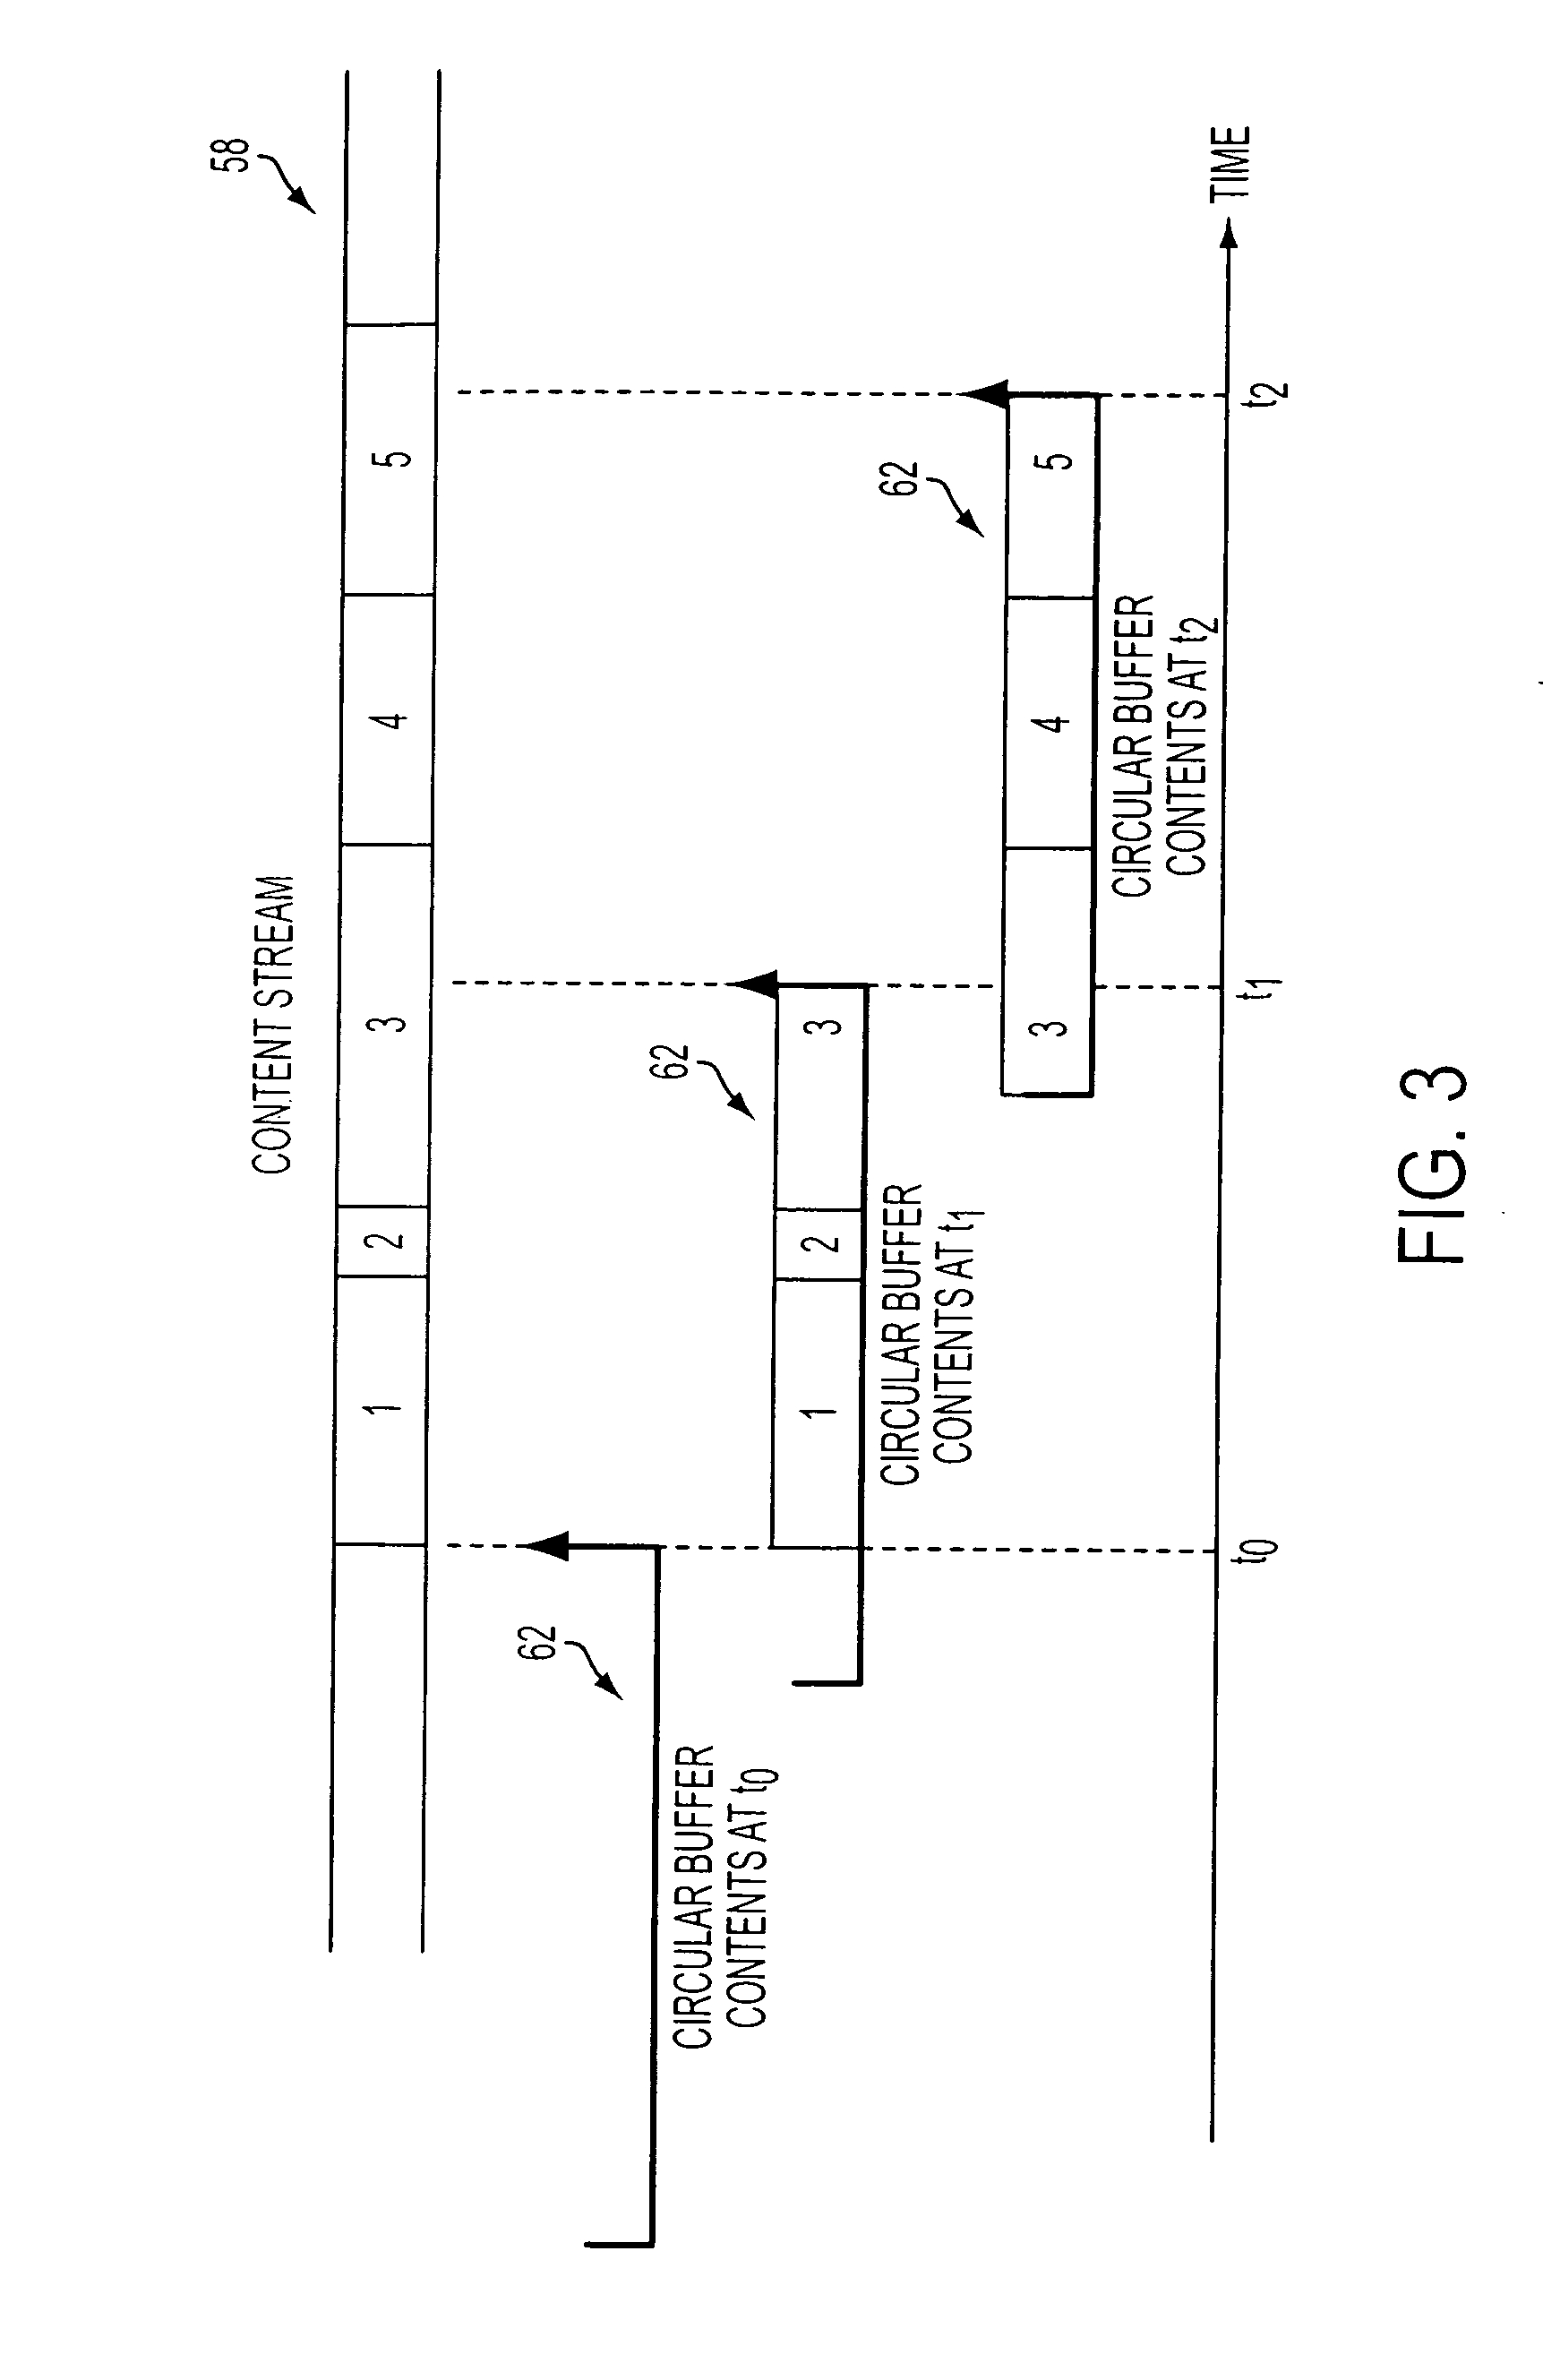 System for insertion of locally cached information into a received broadcast stream